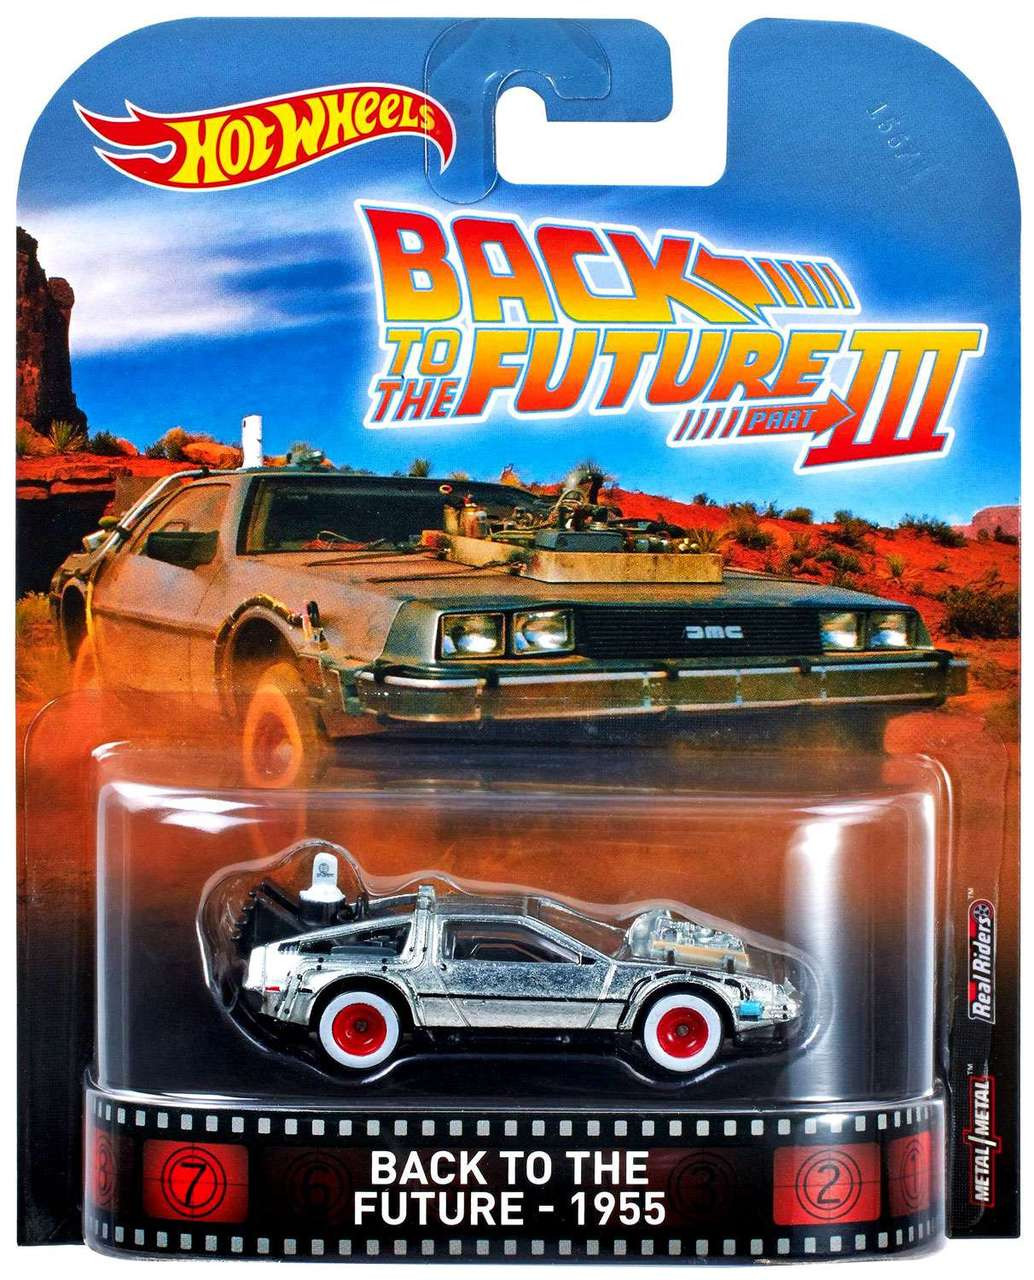 Hot Wheels Back To The Future Part Iii Hw Retro Entertainment Delorean Time Machine 1955 164 Diecast Car Mattel Toys Toywiz - bttf back to the future roblox